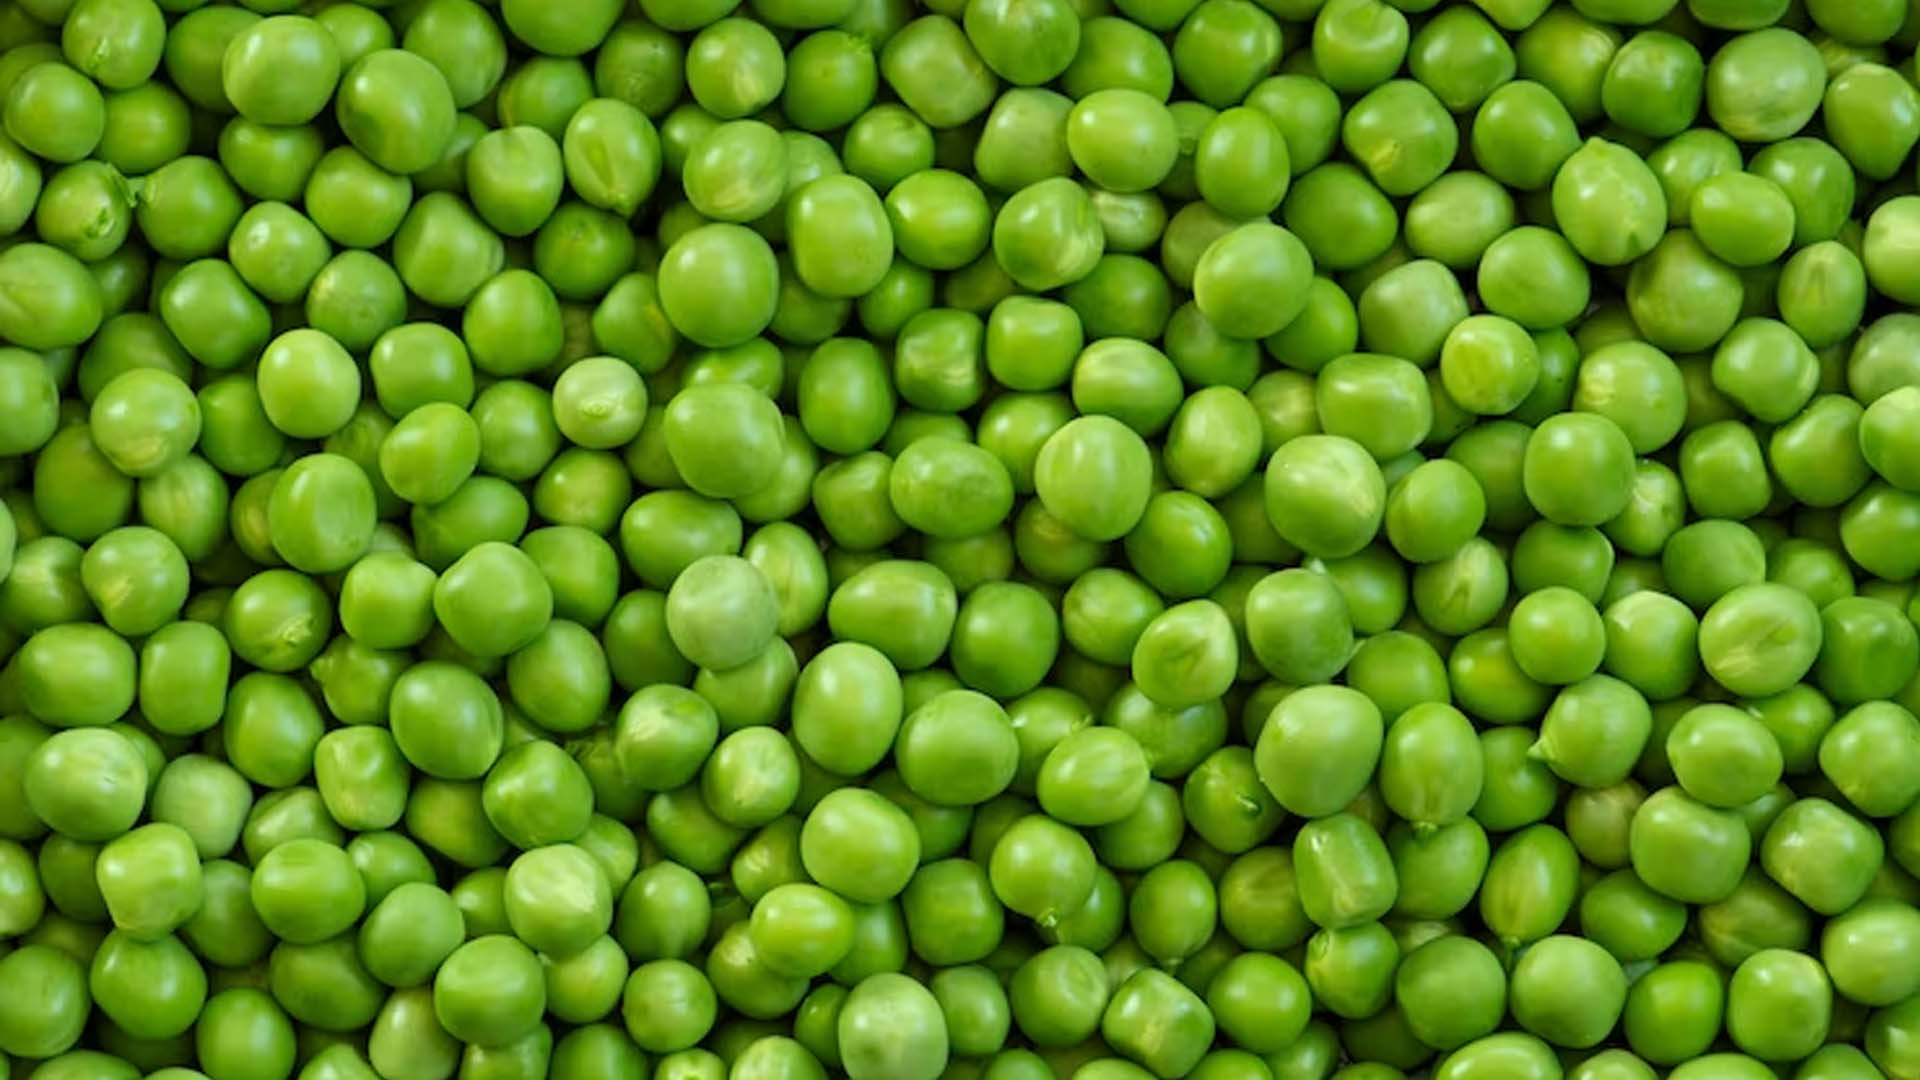 Nutritional Value of Green Peas